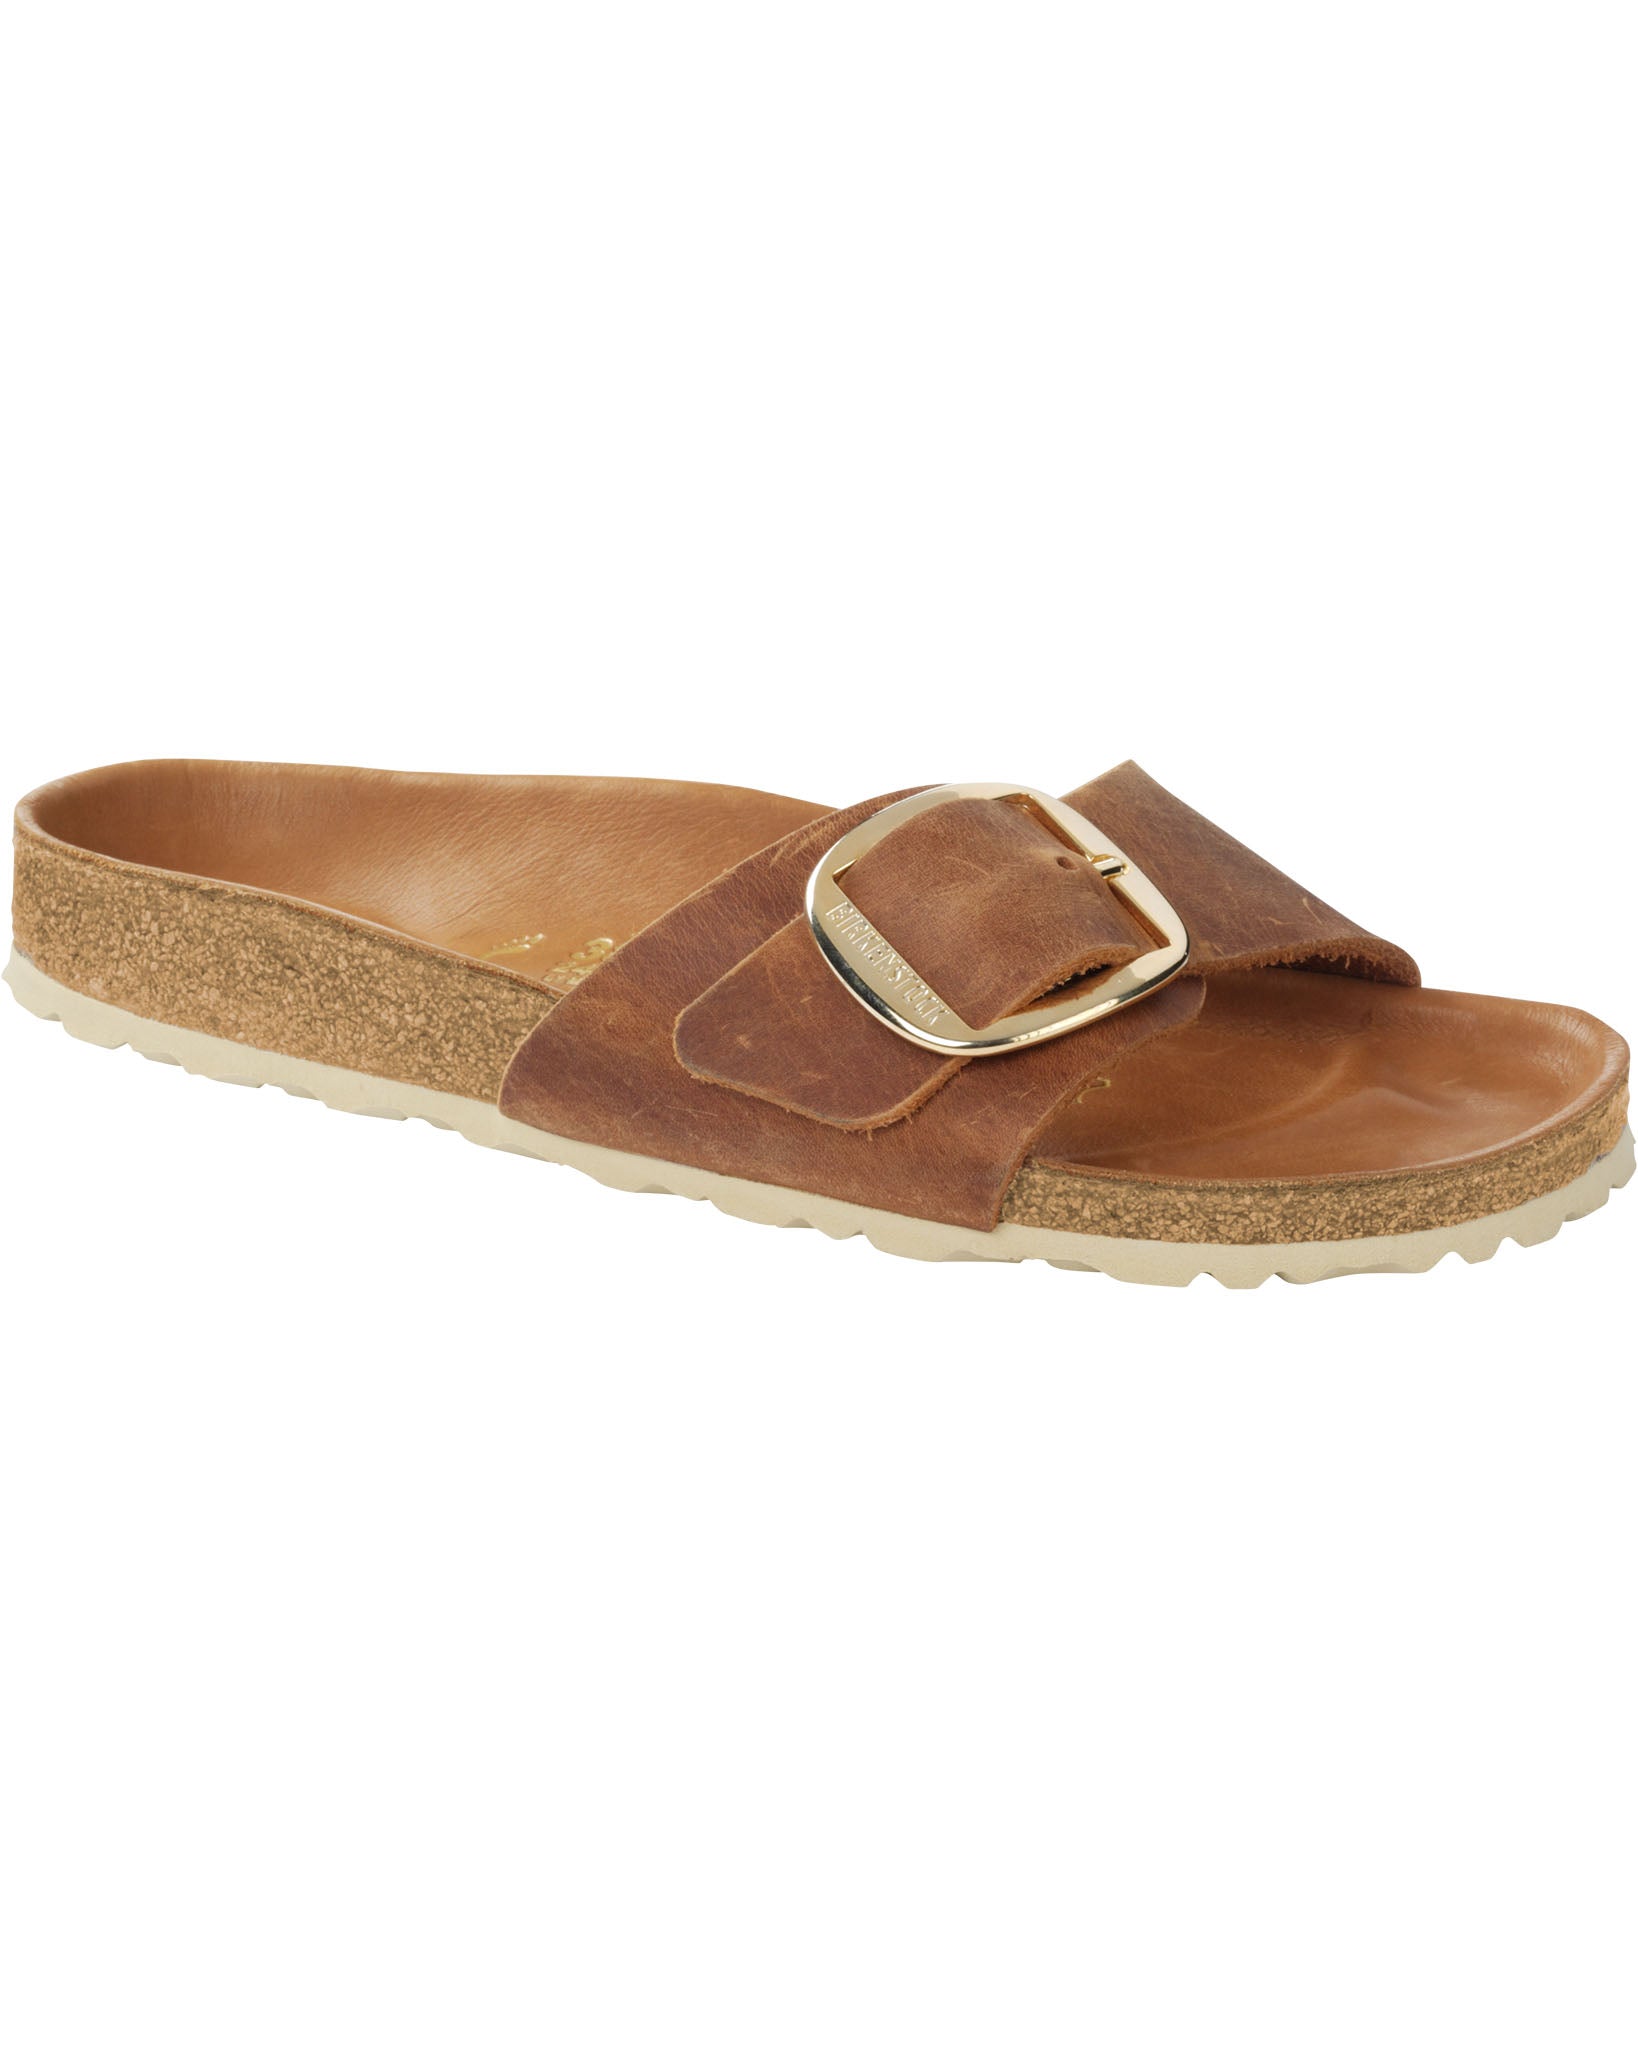 Madrid Big Buckle Cognac Oiled Leather Sandals